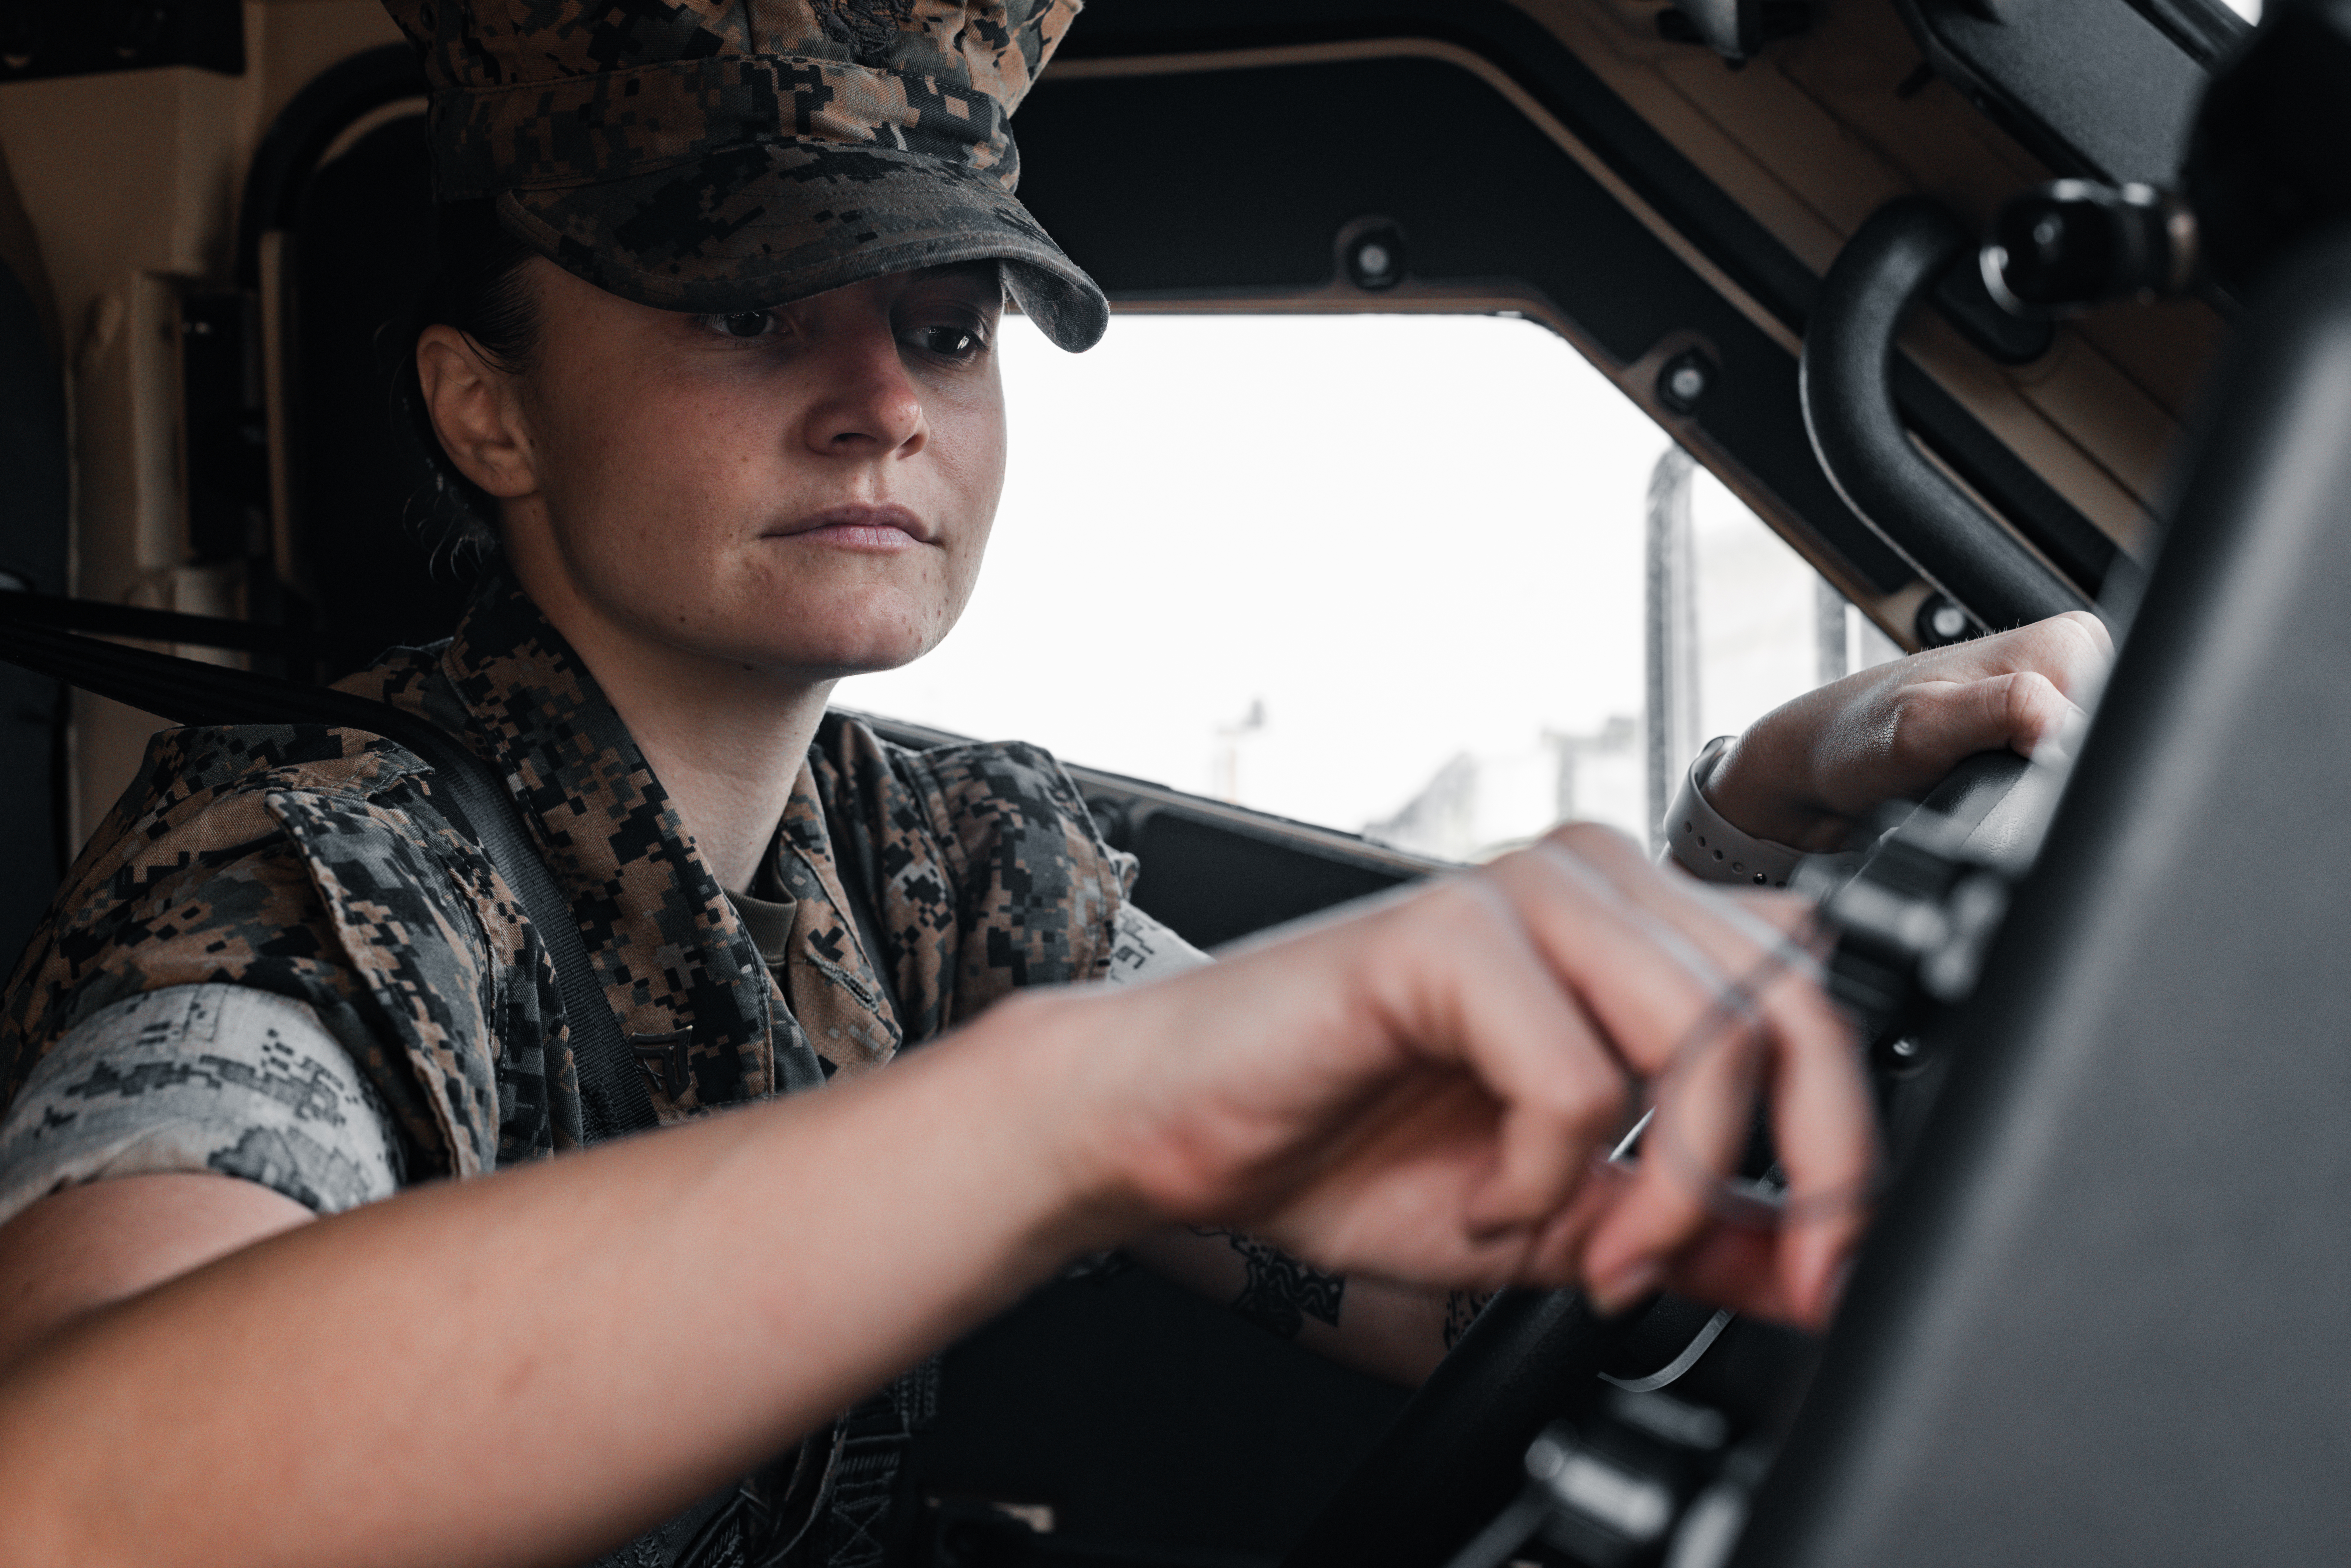 U.S. Marine Corps Cpl. Dilyn O’Connell, a motor transport operator assigned to Headquarters Battalion, 3d Marine Division, prepares a Joint Light-Weight Tactical Vehicle for a trip at Camp Courtney, Okinawa, Japan, April 3, 2023. O’Connell was identified as an exemplary Marine with a warfighting spirit and exceptional leadership ability when she was named class leader of HQBN Corporal’s Course 3-23. O’Connell shared her philosophy on small unit leadership saying, “A good leader doesn’t worry about their success, but about the success of those around and below them.” O’Connell, a native of Lapeer, Michigan, takes pride in her Marines’ success and is driven to support them to achieve their potential.